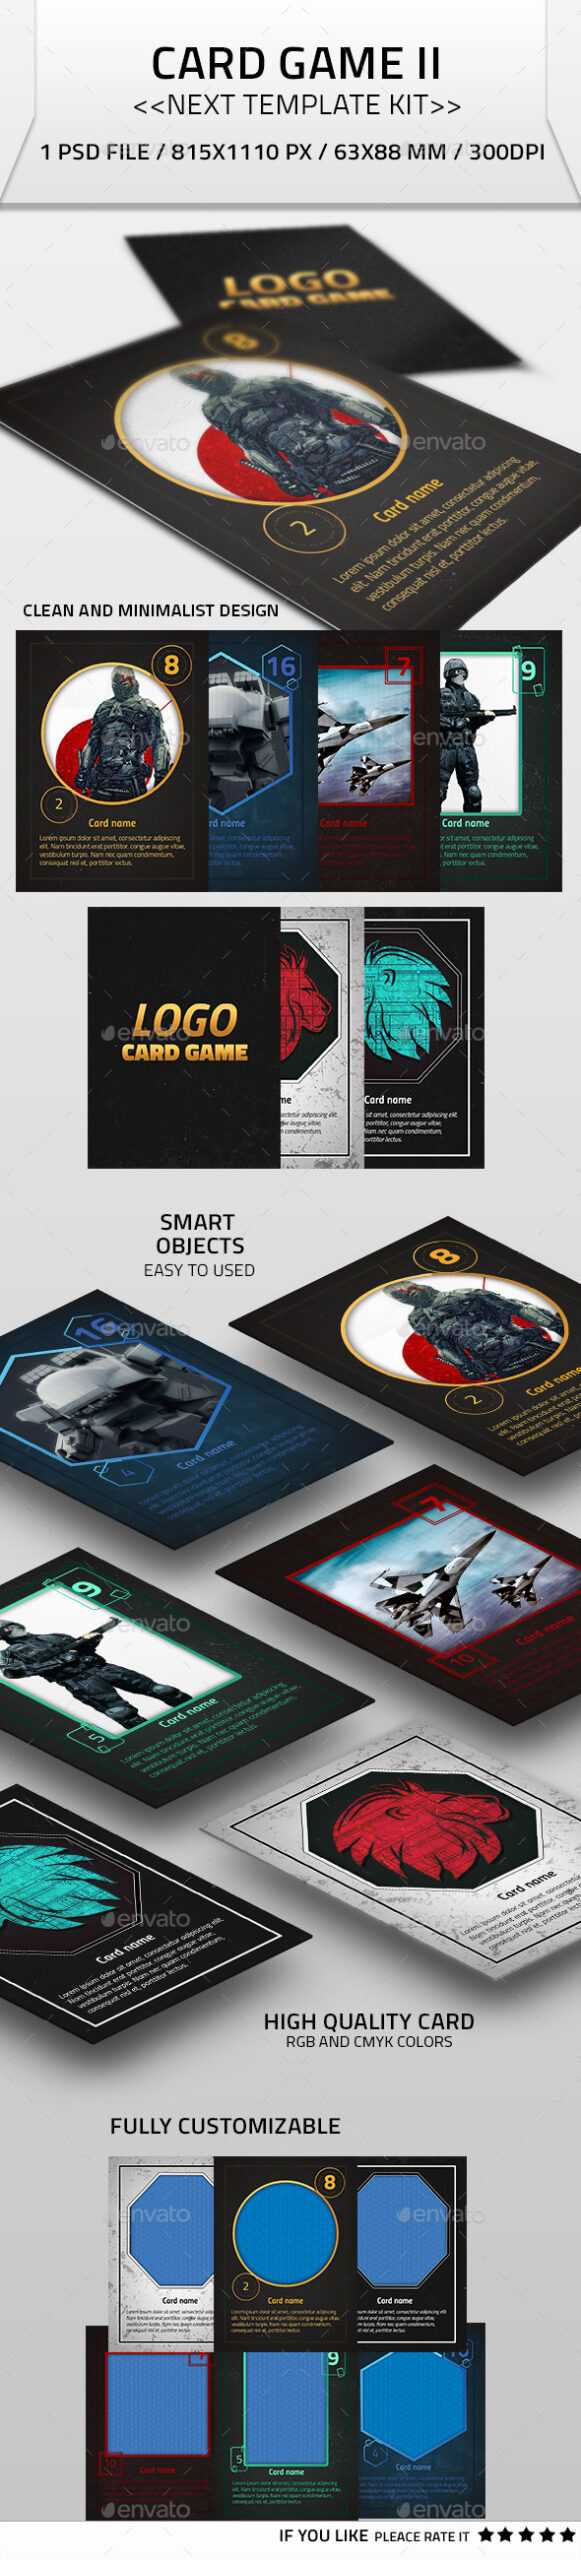 Card Game Graphics, Designs & Templates From Graphicriver Regarding Superhero Trading Card Template